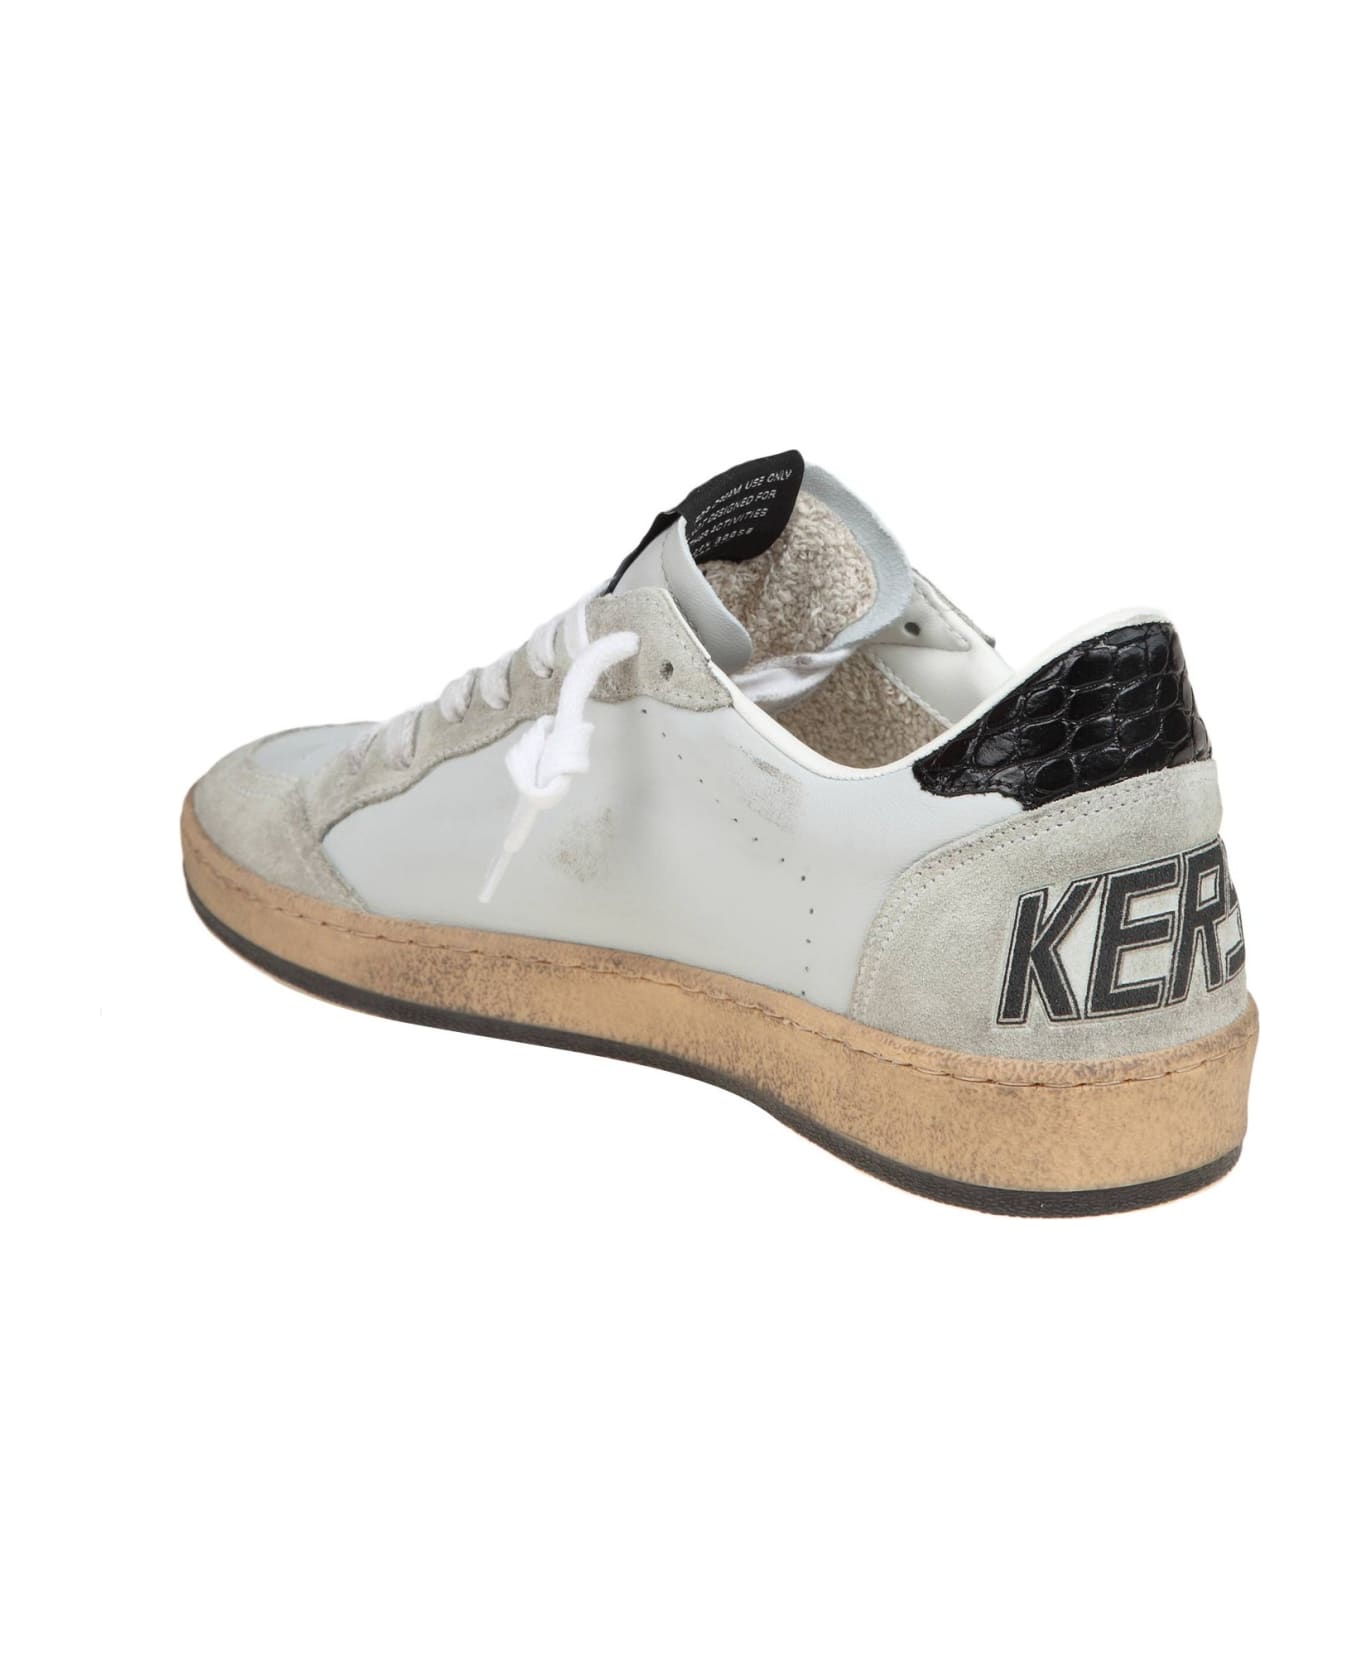 Golden Goose Ballstar In Ice Color Leather And Suede - GRAY/ICE/BLK スニーカー